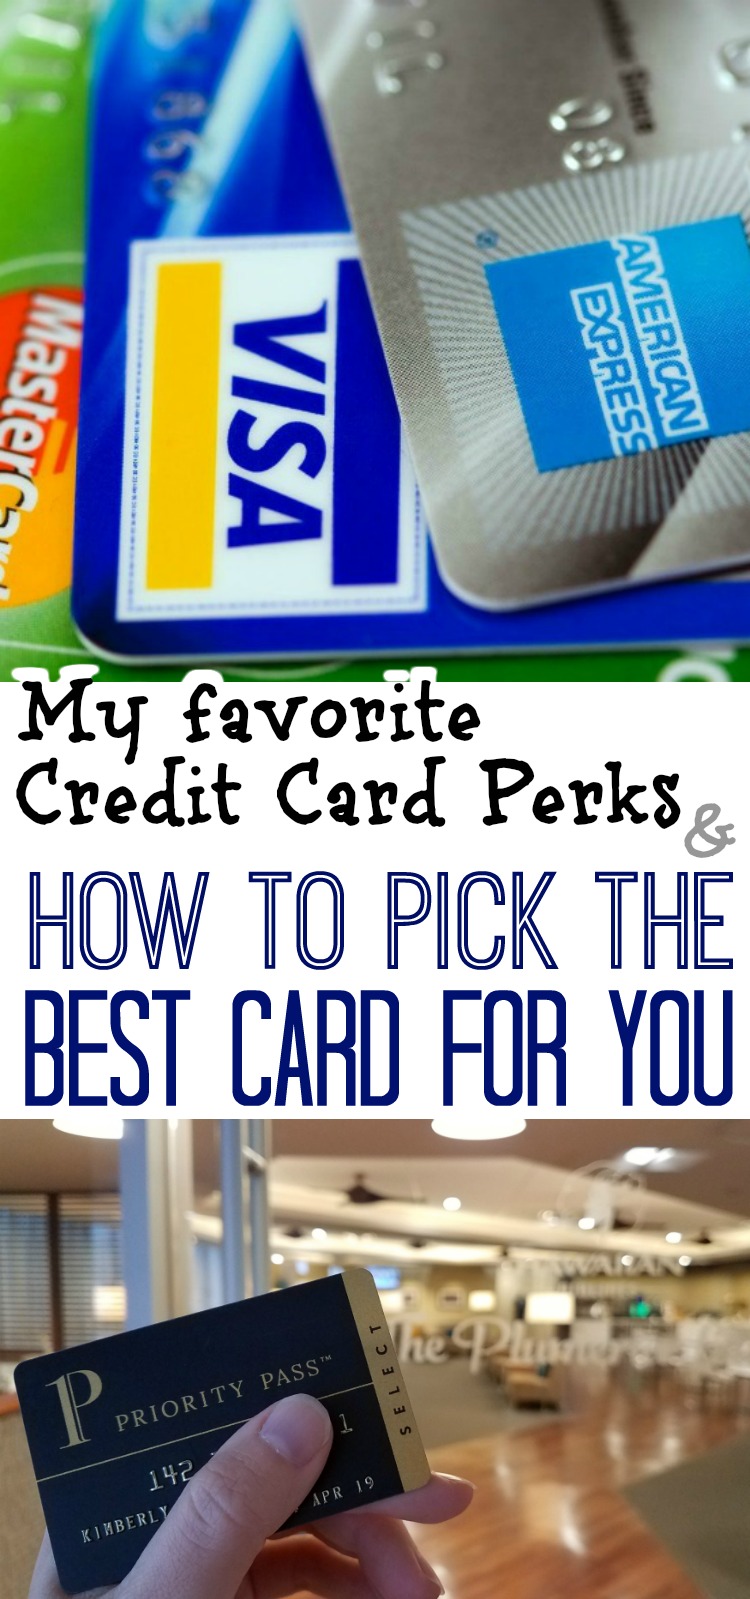 How to pick the best credit card for travel | finances | credit card tips | travel hacking